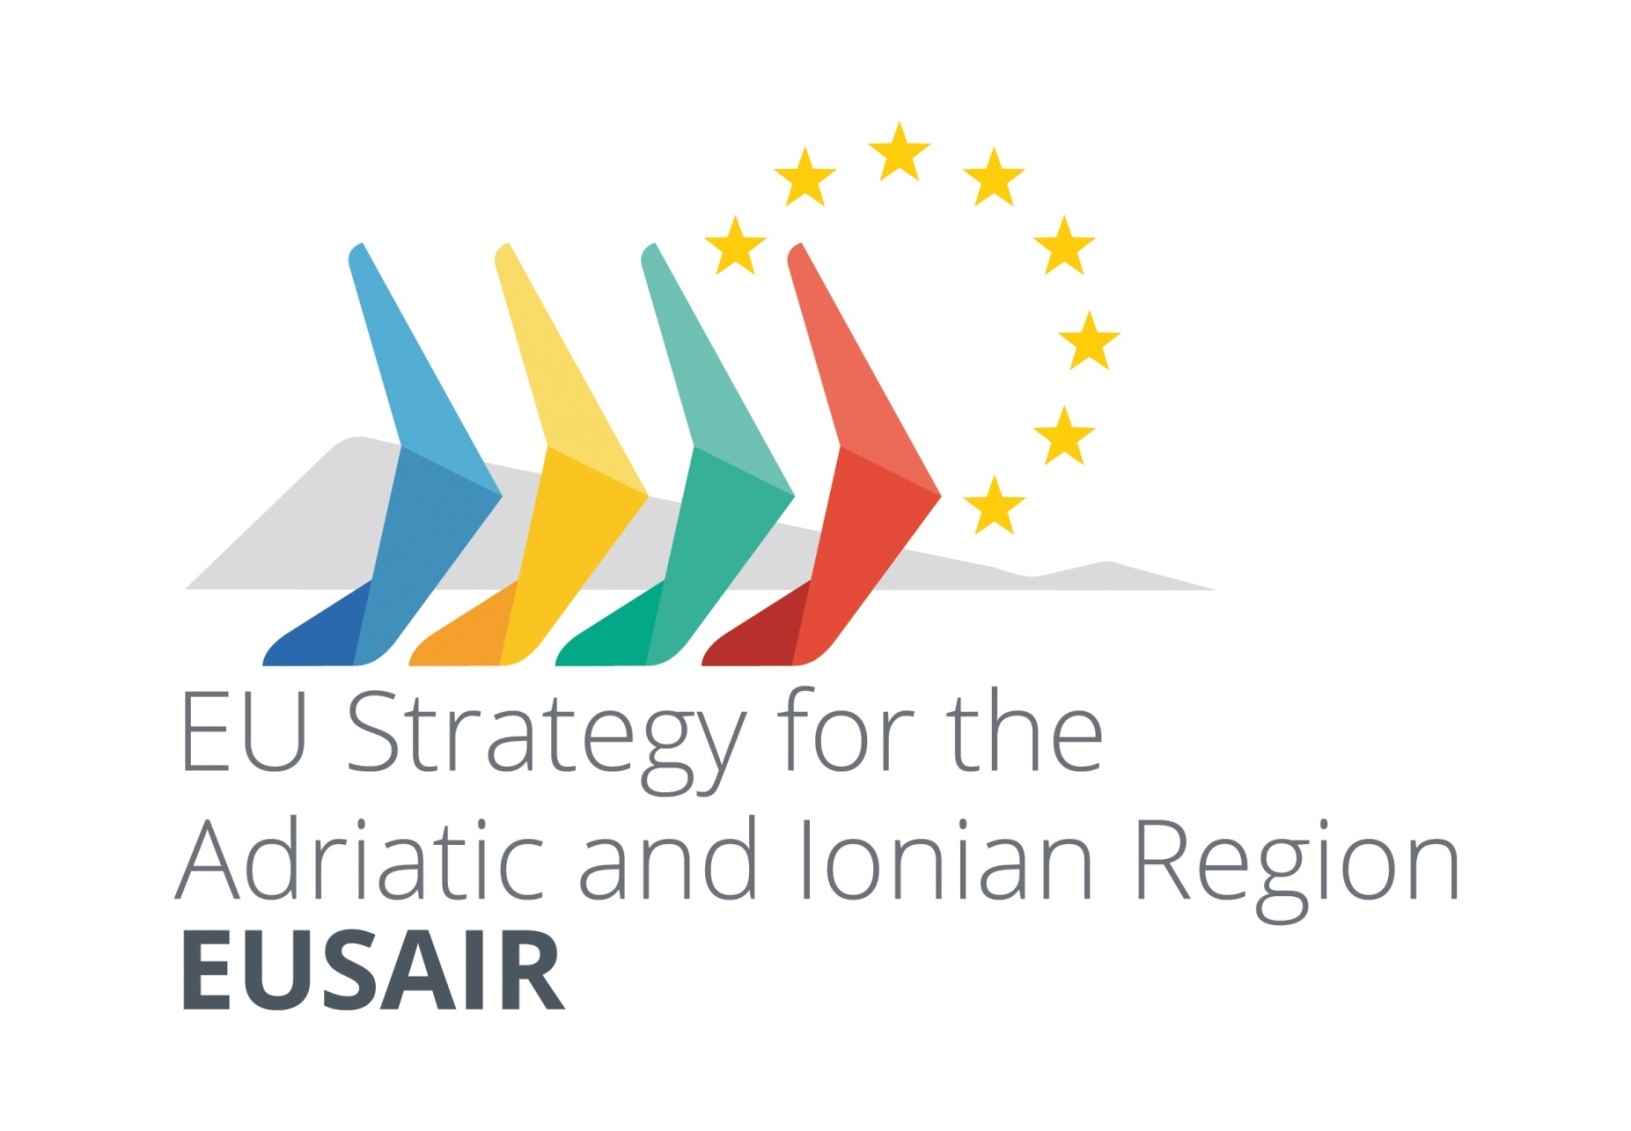 The EU Strategy for the Adriatic and Ionian Region